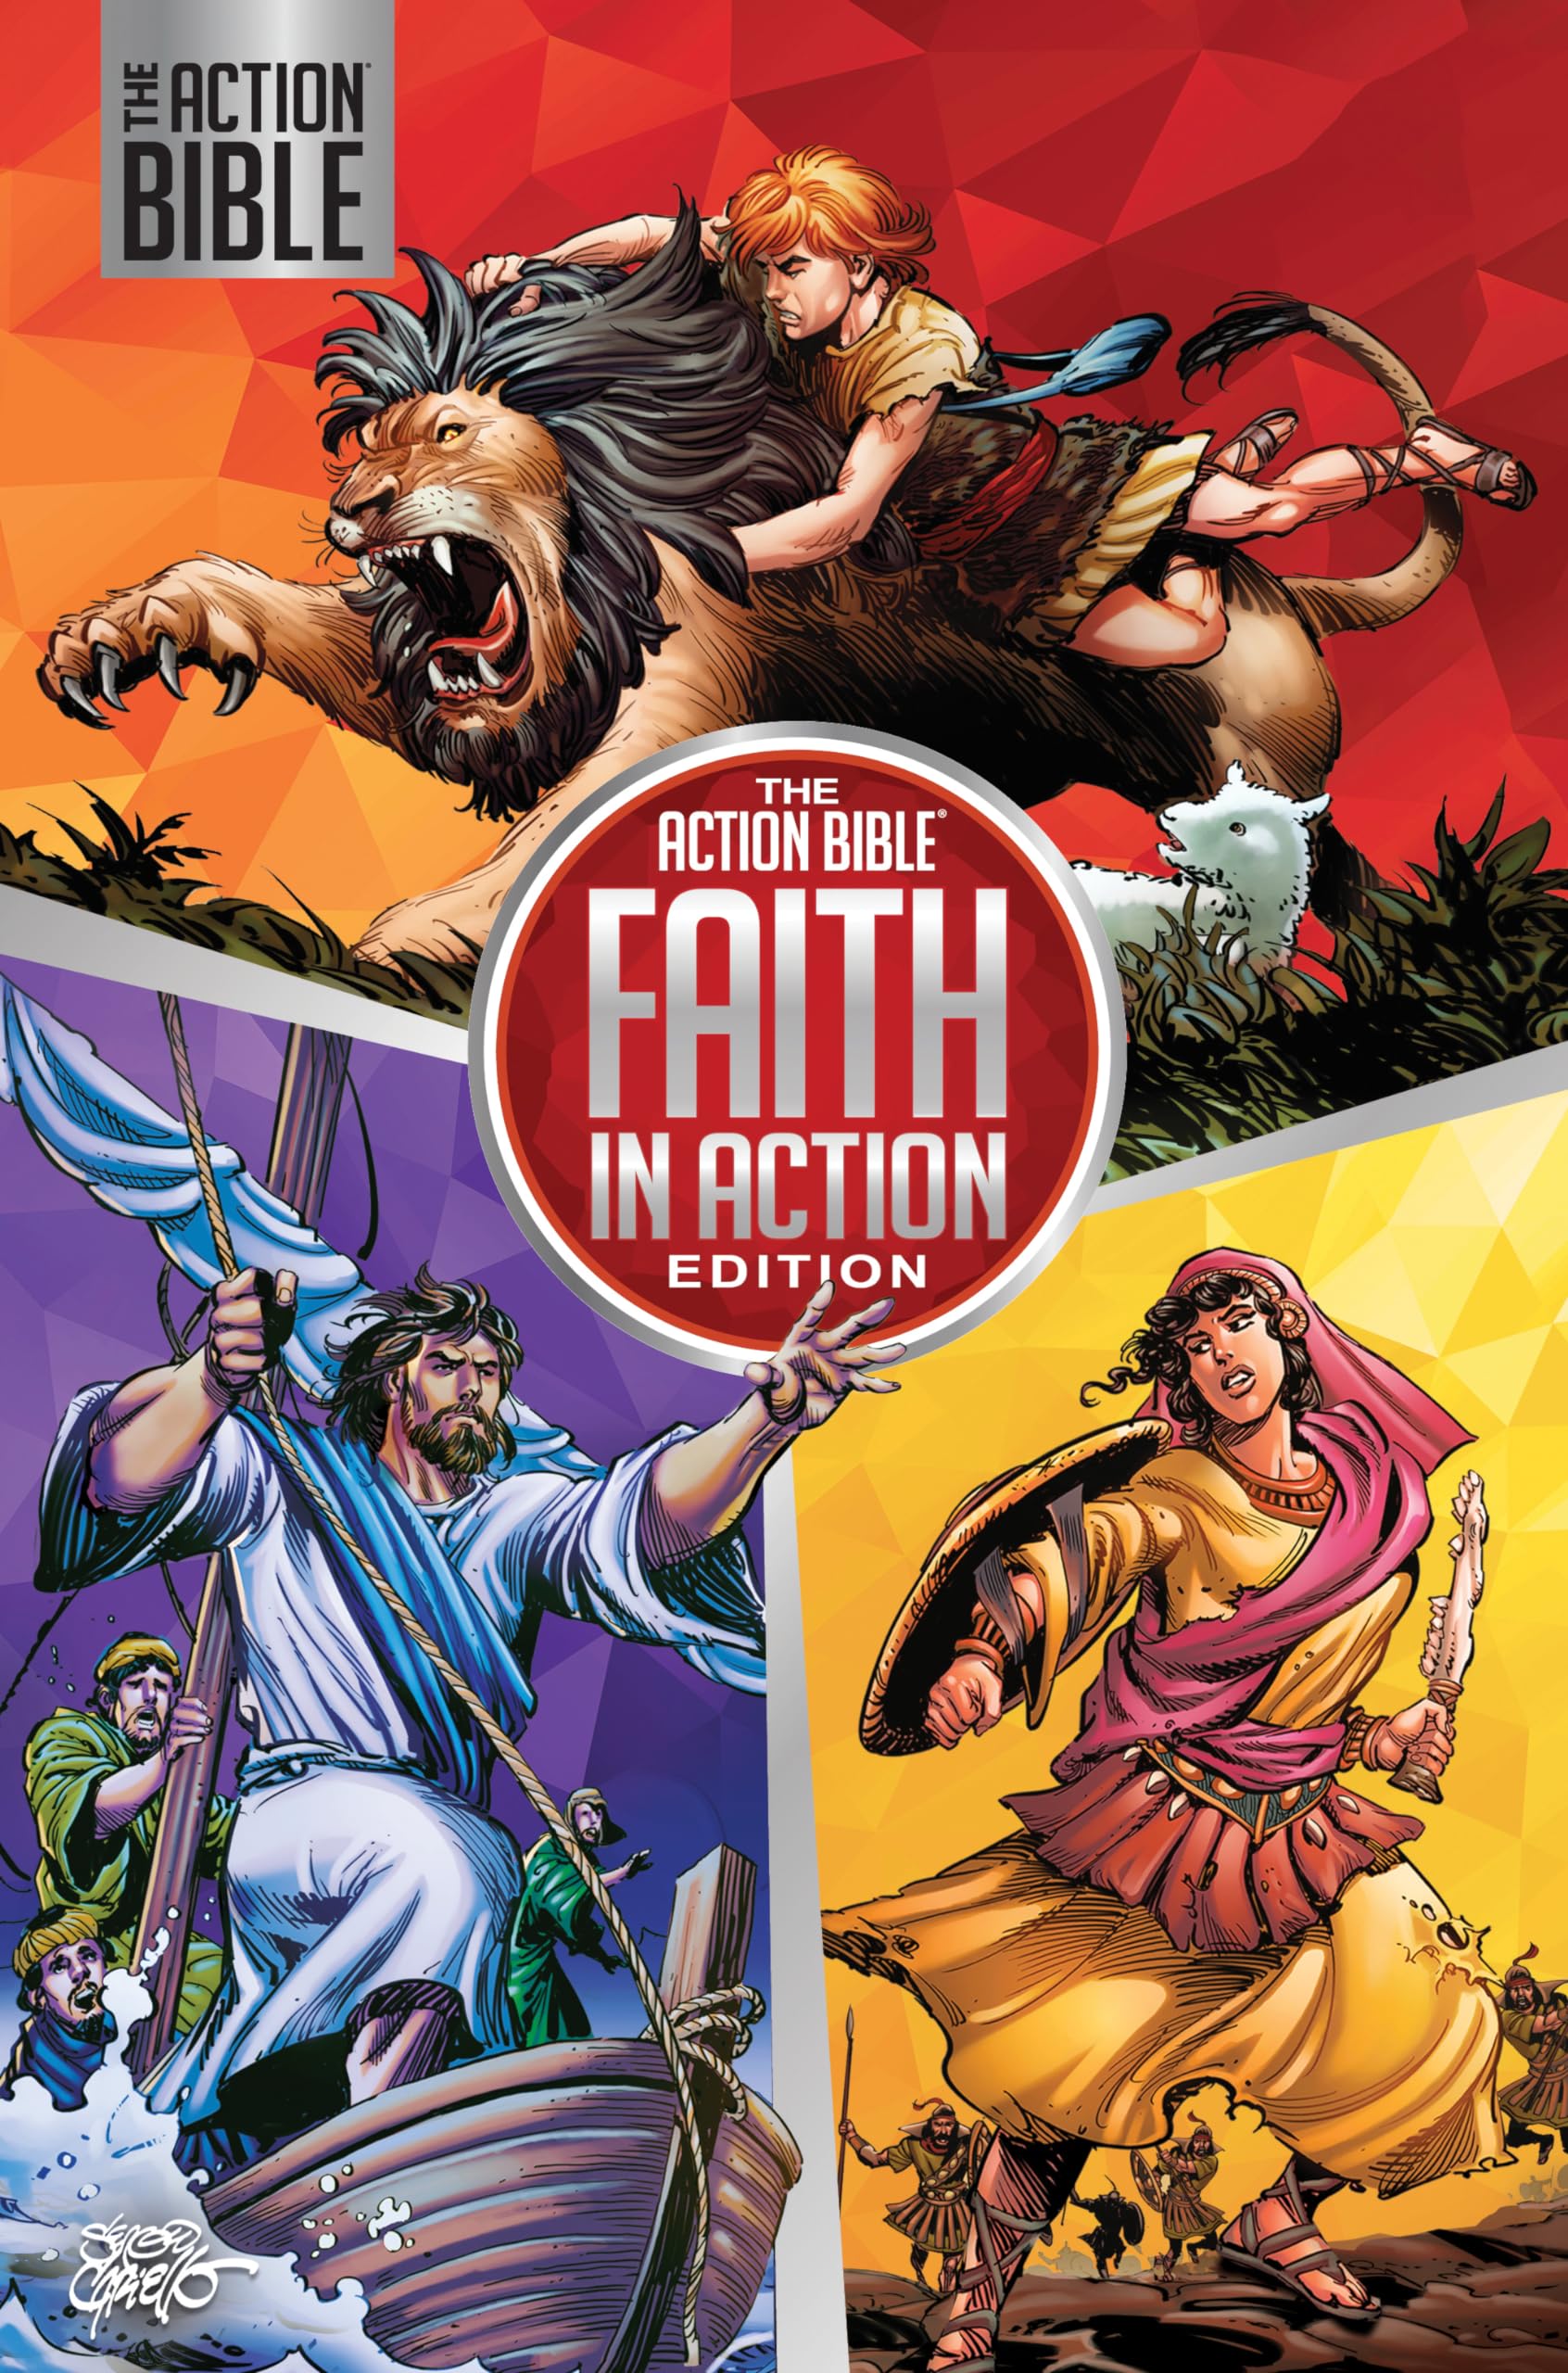 The Action Bible: Faith in Action Edition by Cariello, Sergio